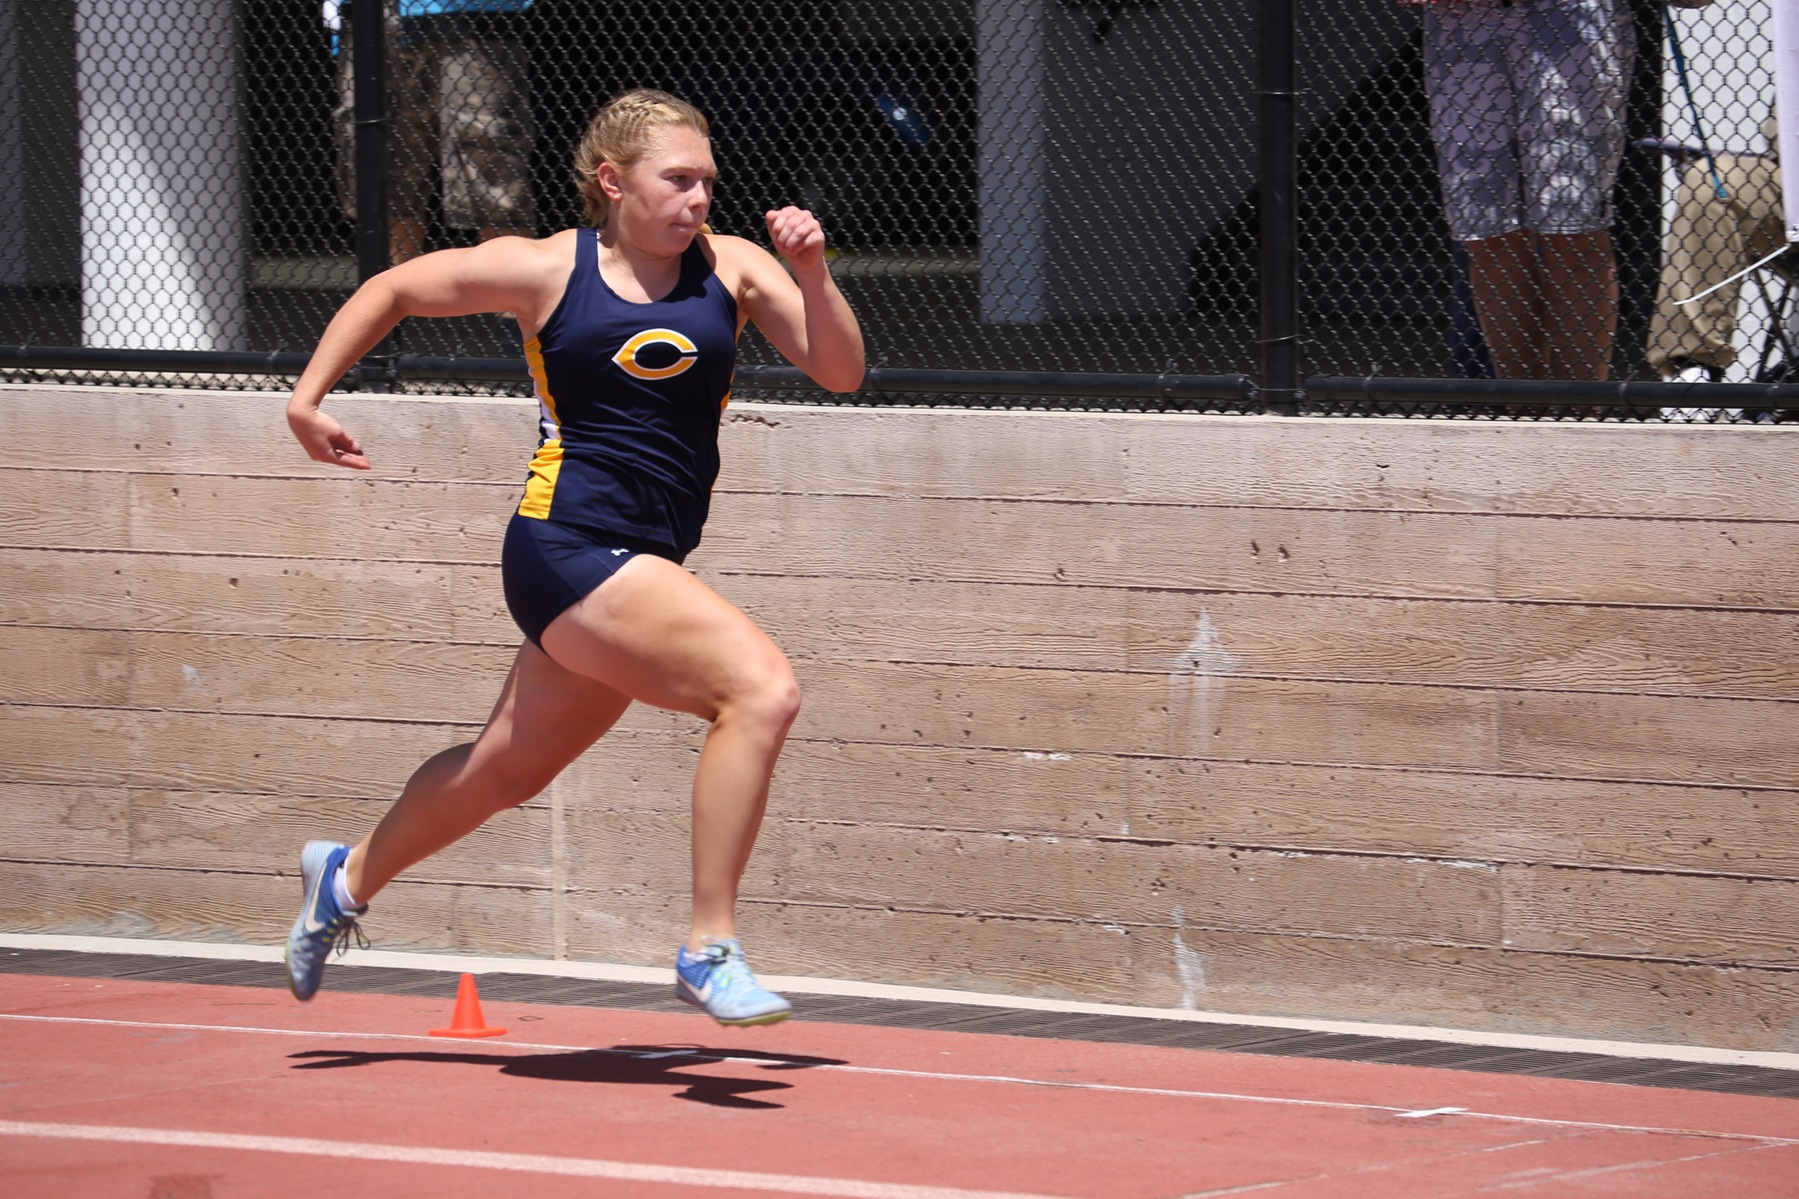 COC student-athlete Megan Carbajal competes for the COC women's track & field program.